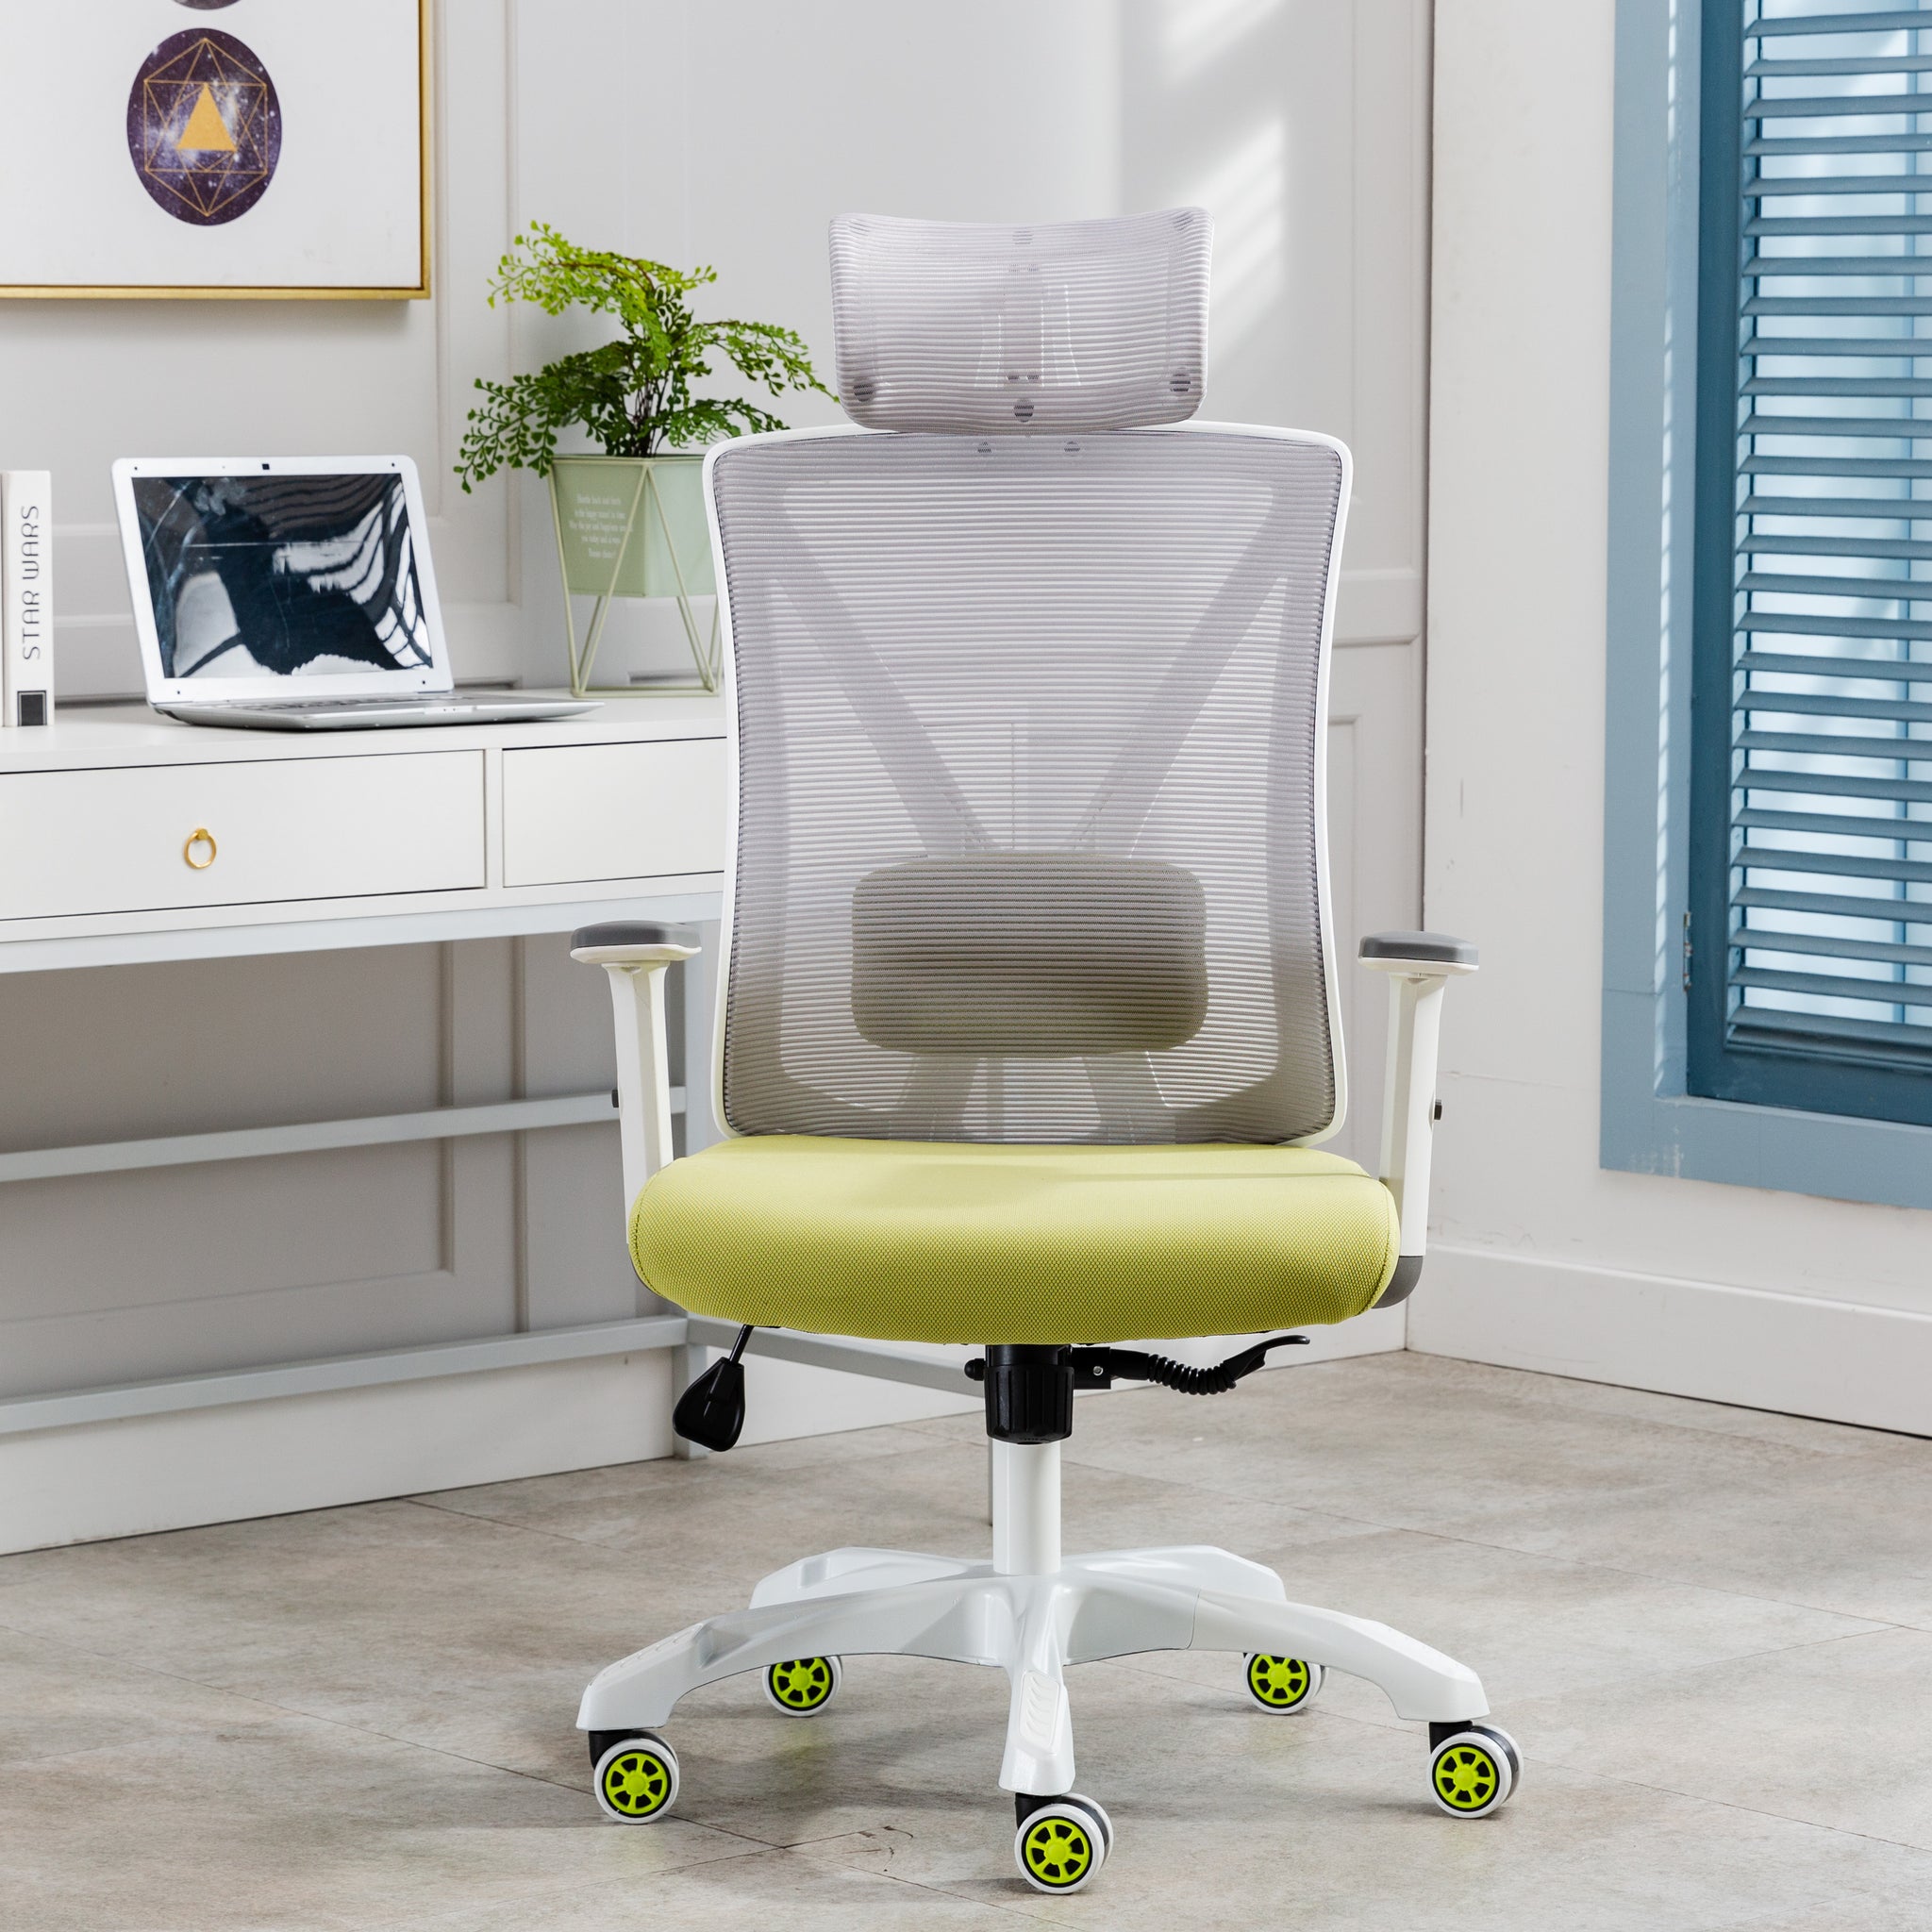 Ergonomic Home Office Chair with Adjustable Lumbar Support and Armrests,Breathable Mesh Back and Padded Seat Desk Chair, White Task Chair,Computer Chair for Work